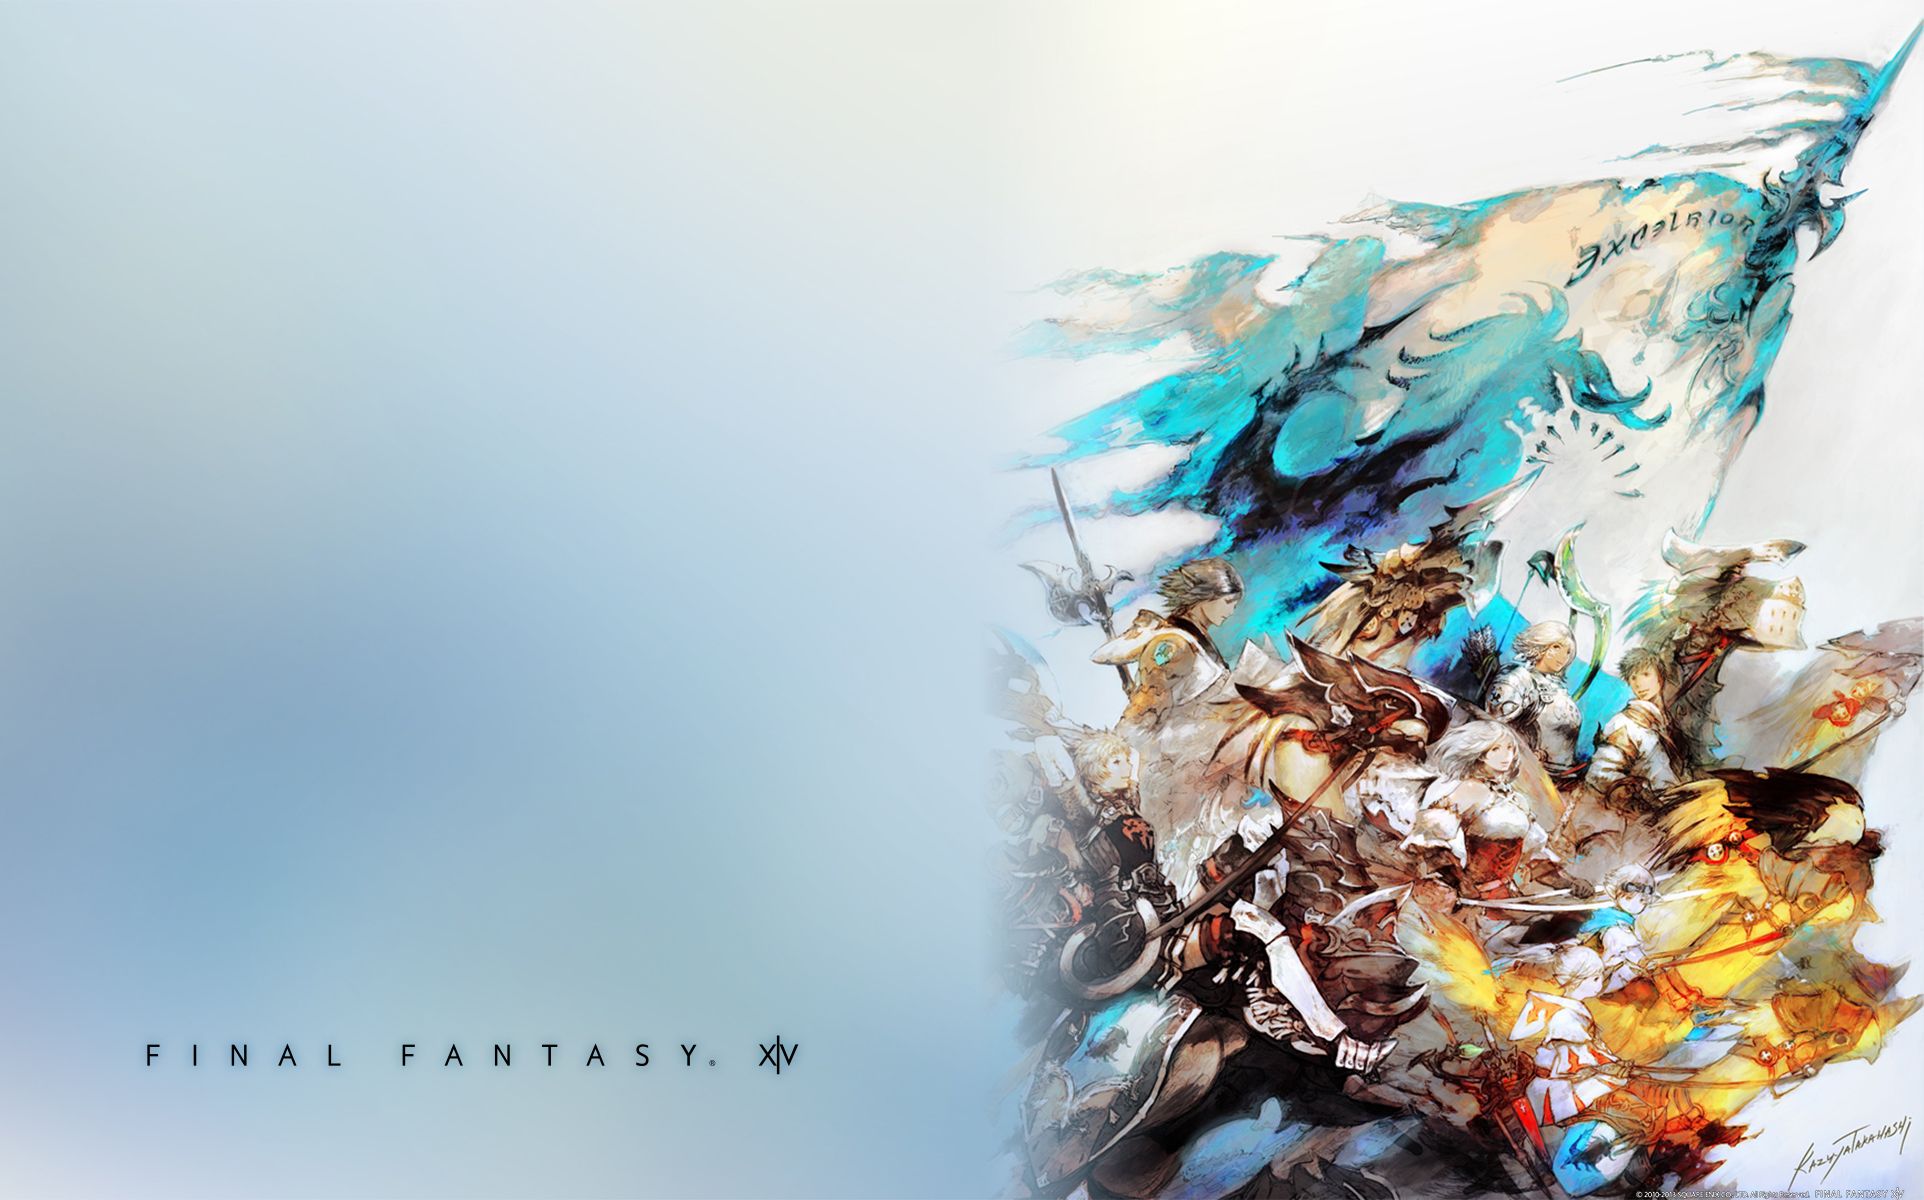 Official Final Fantasy XIV Themes/Wallpapers Released for PC and ...